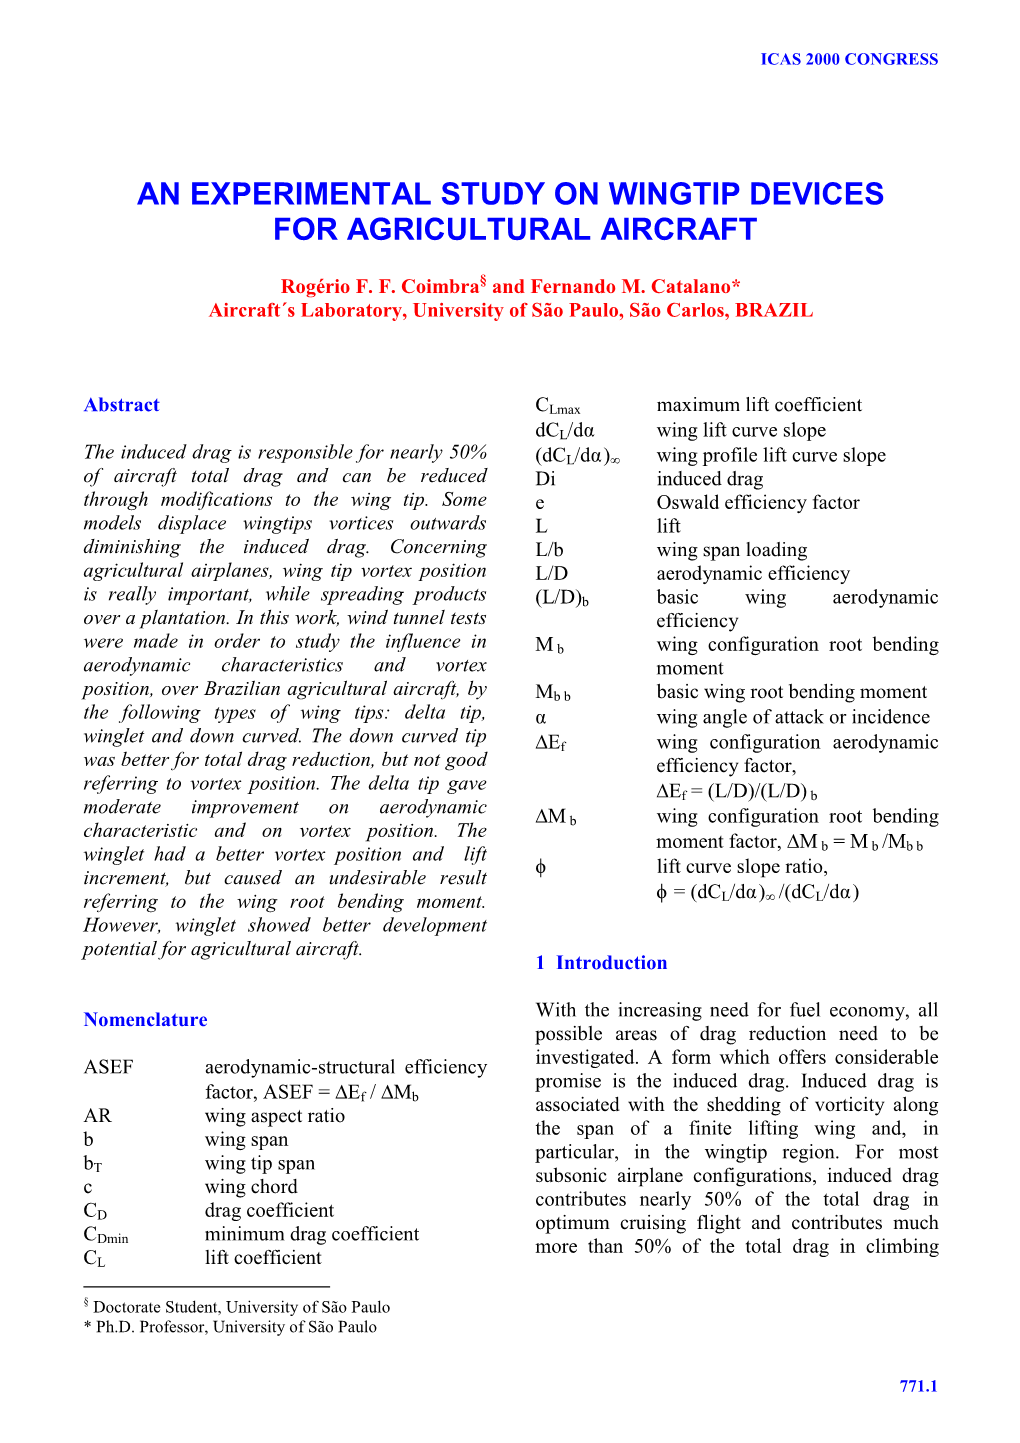 An Experimental Study on Wingtip Devices for Agricultural Aircraft